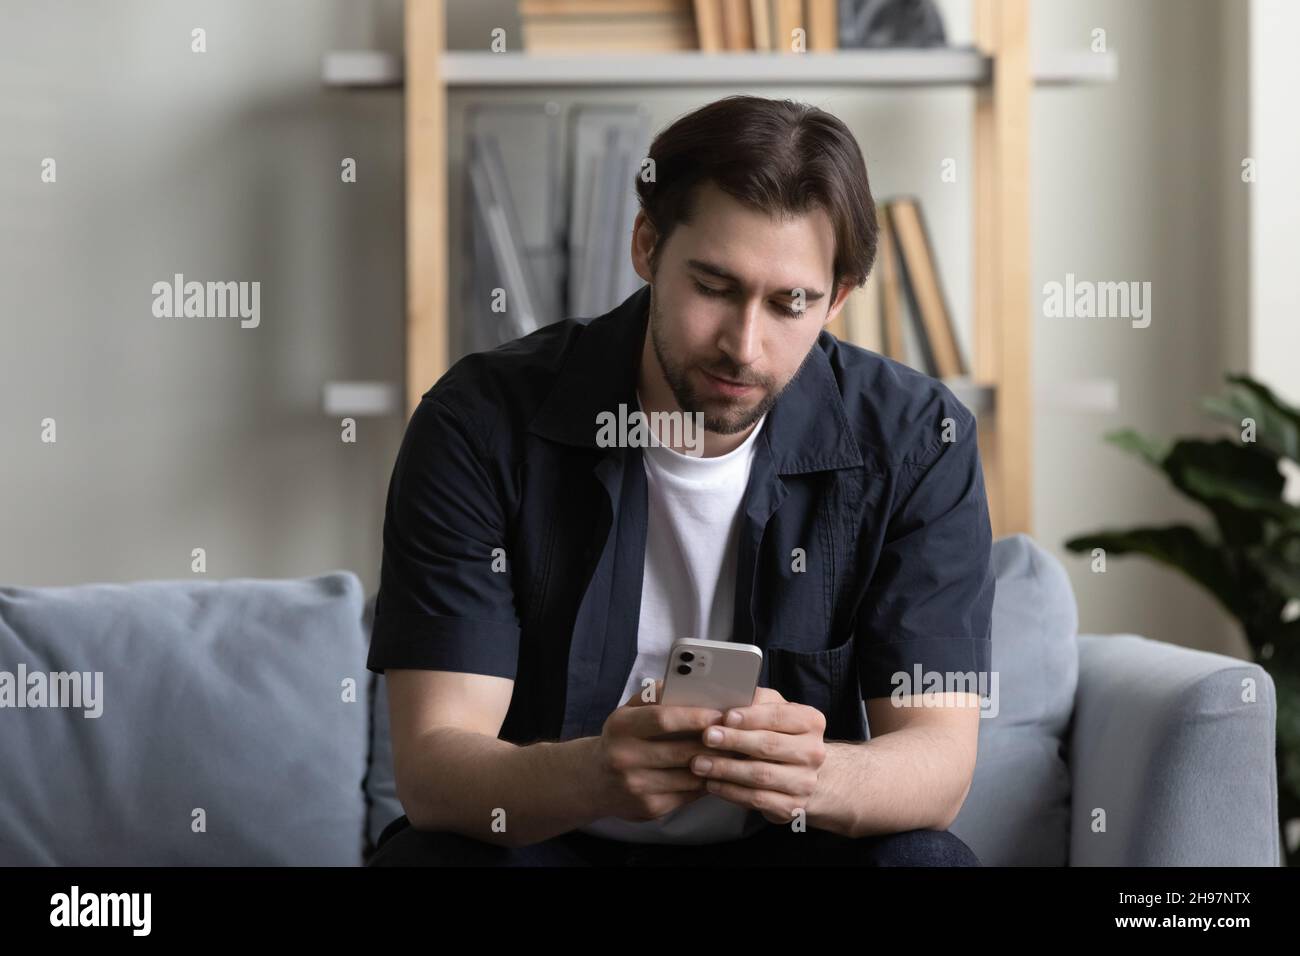 Focused cell user reading text message on mobile phone screen Stock Photo